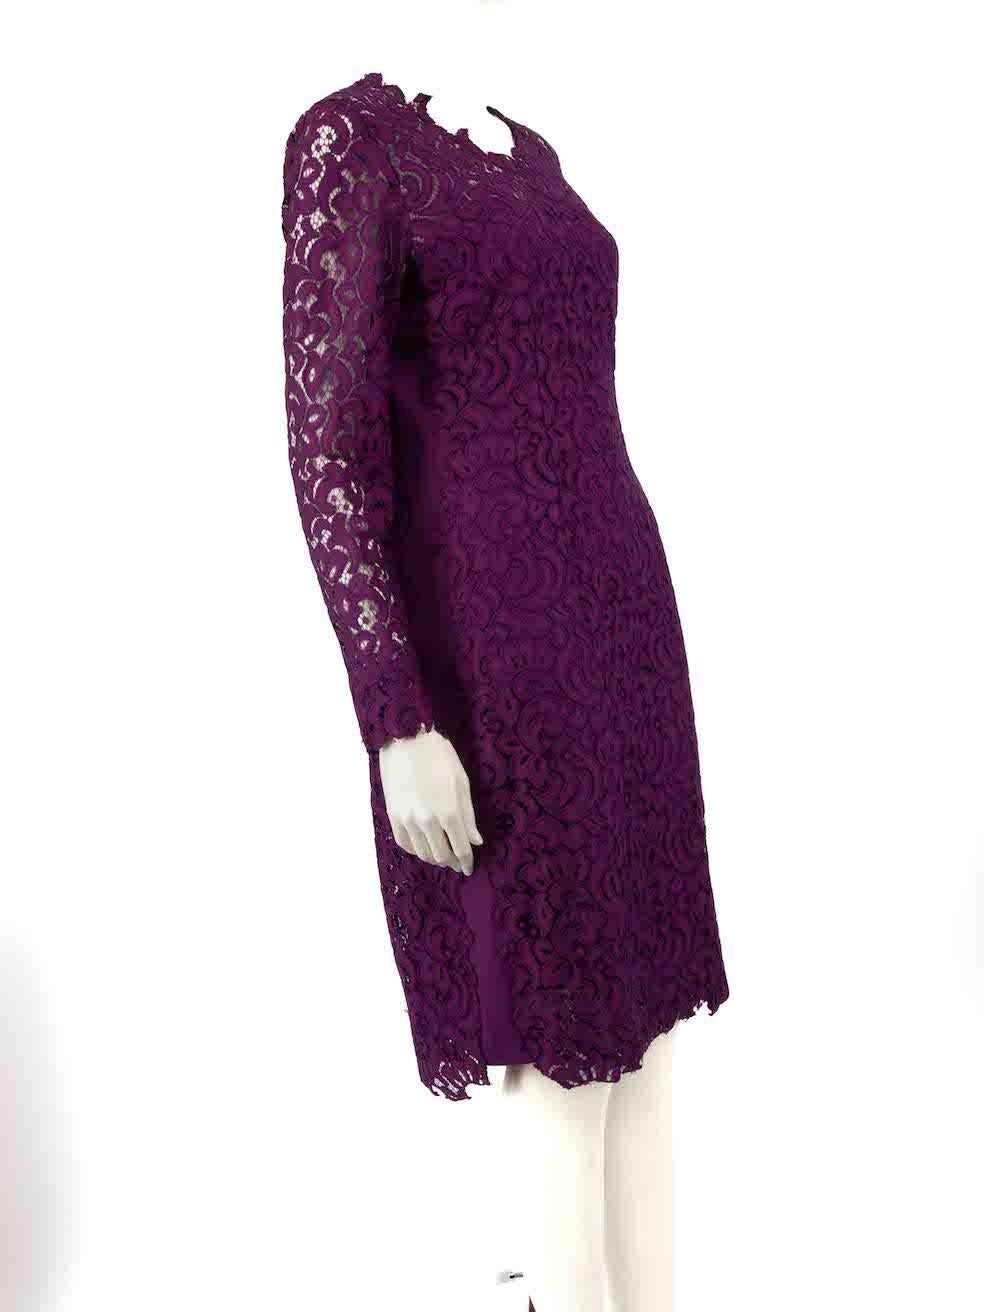 CONDITION is Very good. Minimal wear to dress is evident. Minimal wear to neckline with minor tears to lace overlay on this used Elie Tahari designer resale item.
 
 
 
 Details
 
 
 Purple
 
 Lace
 
 Dress
 
 Long sleeves
 
 Round neck
 
 Midi
 
